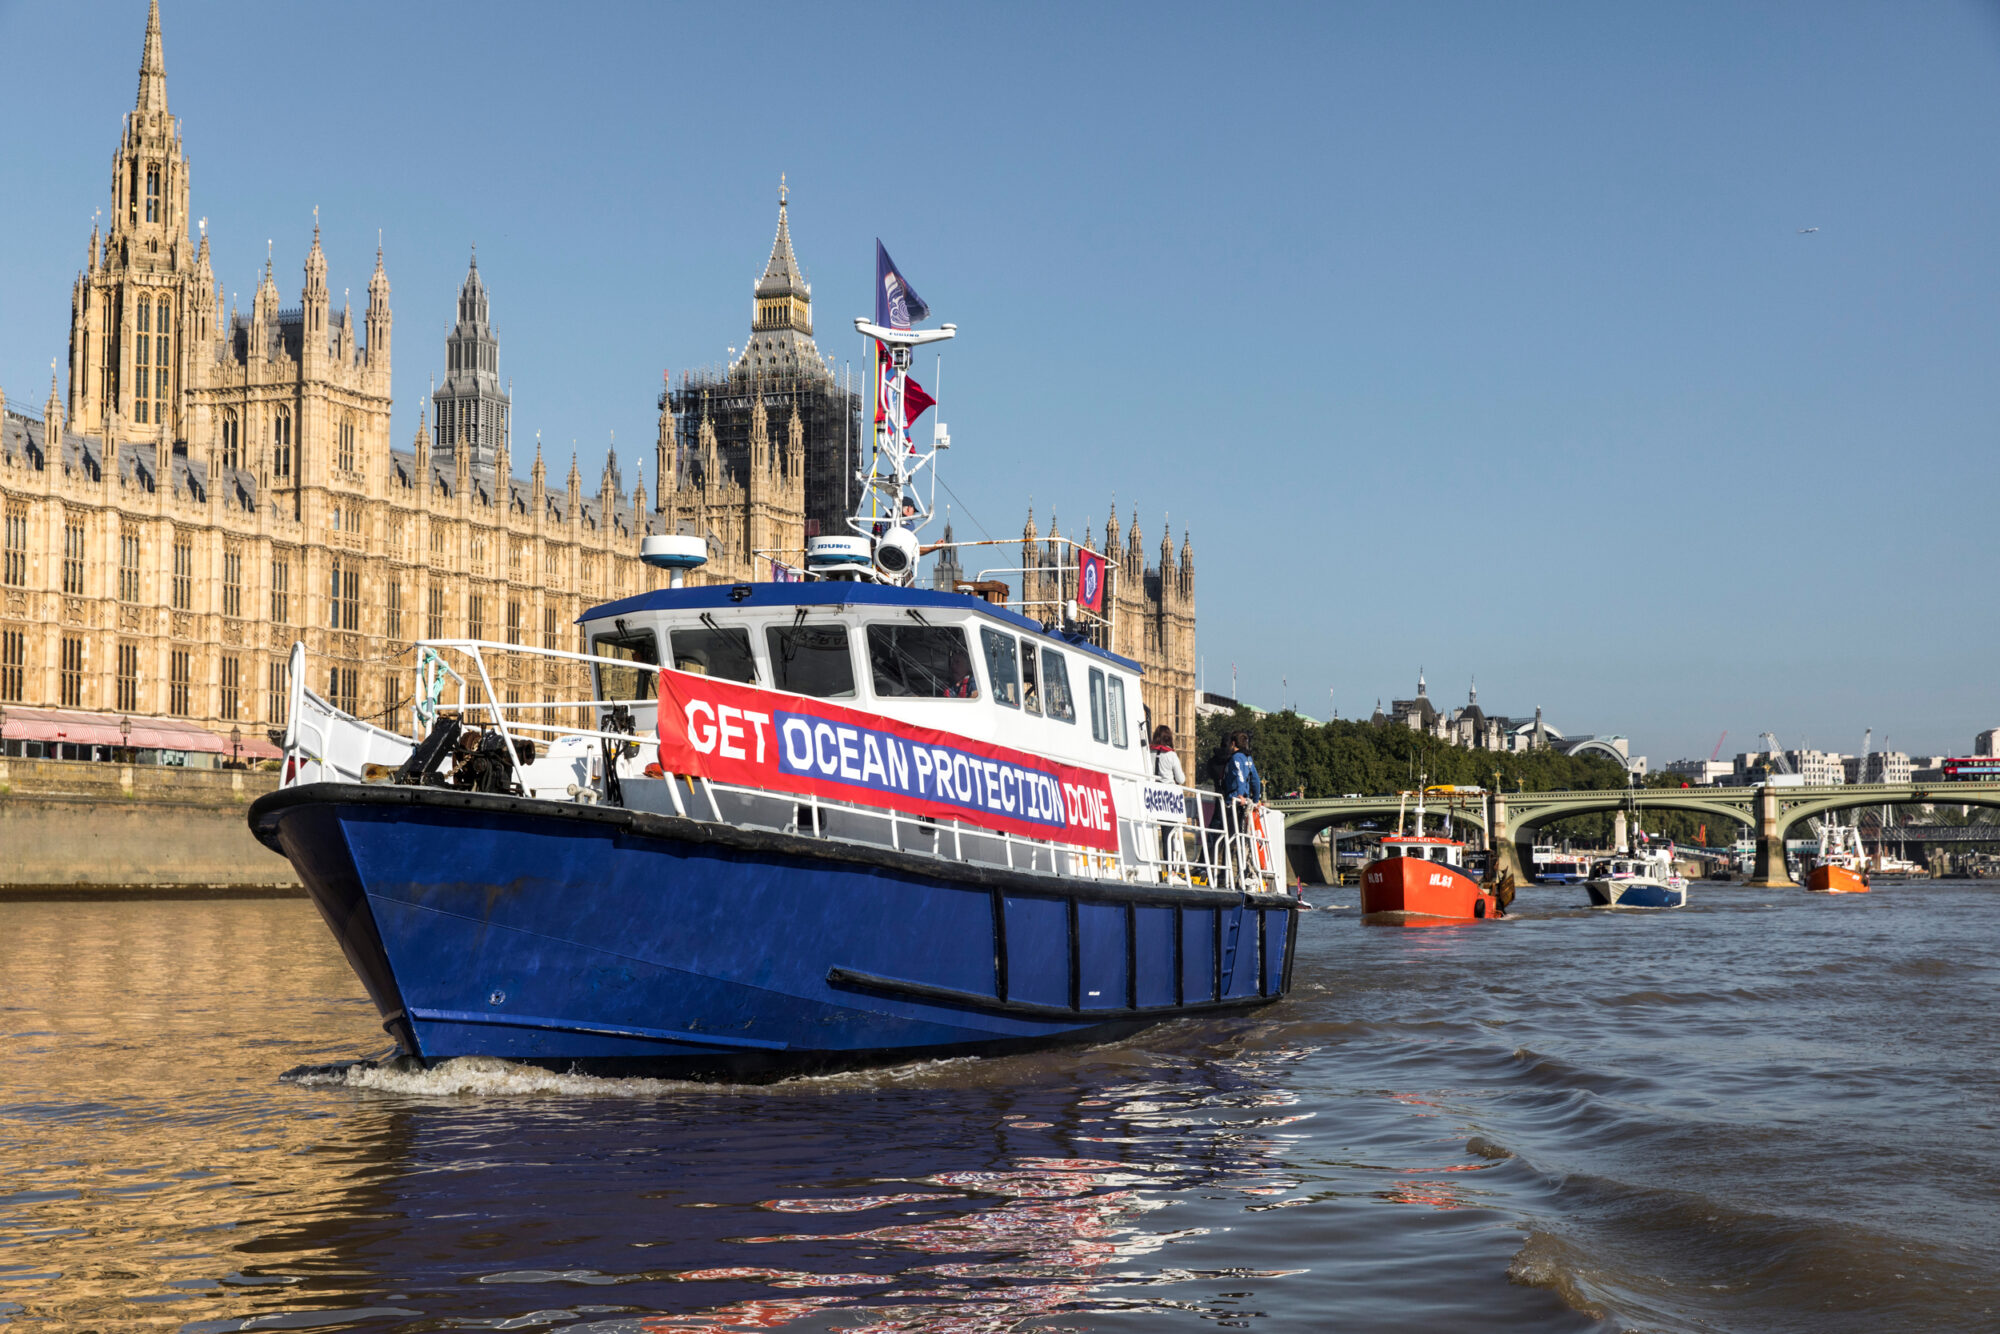 A fishing boat on the river Thames outside the Houses of Parliament. A sign on the side reads "Get ocean protection done"